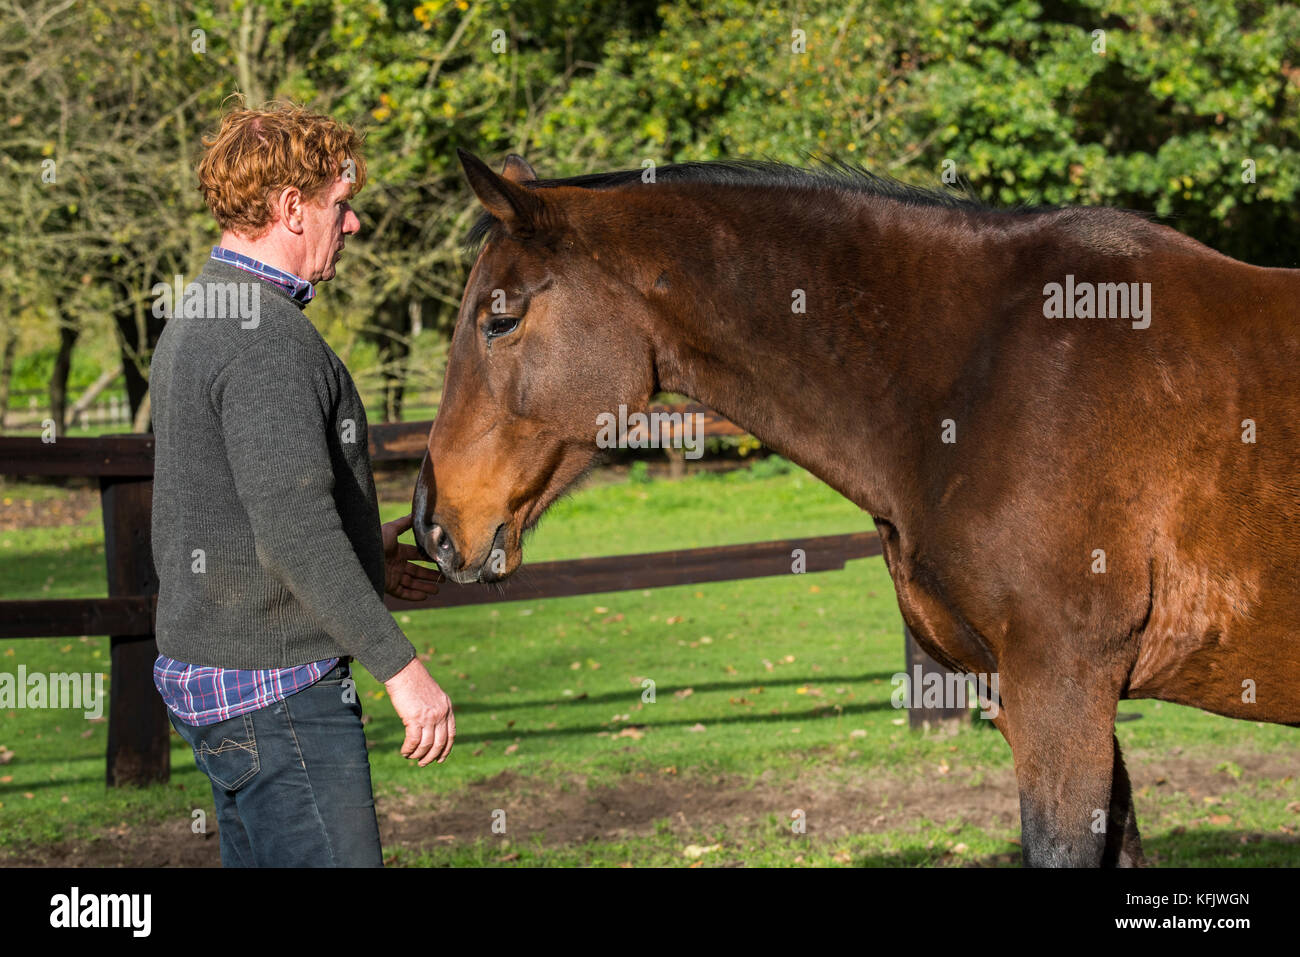 Natural horsemanship practitioner with brown Belgian Warmblood horse outdoors in field within wooden enclosure Stock Photo